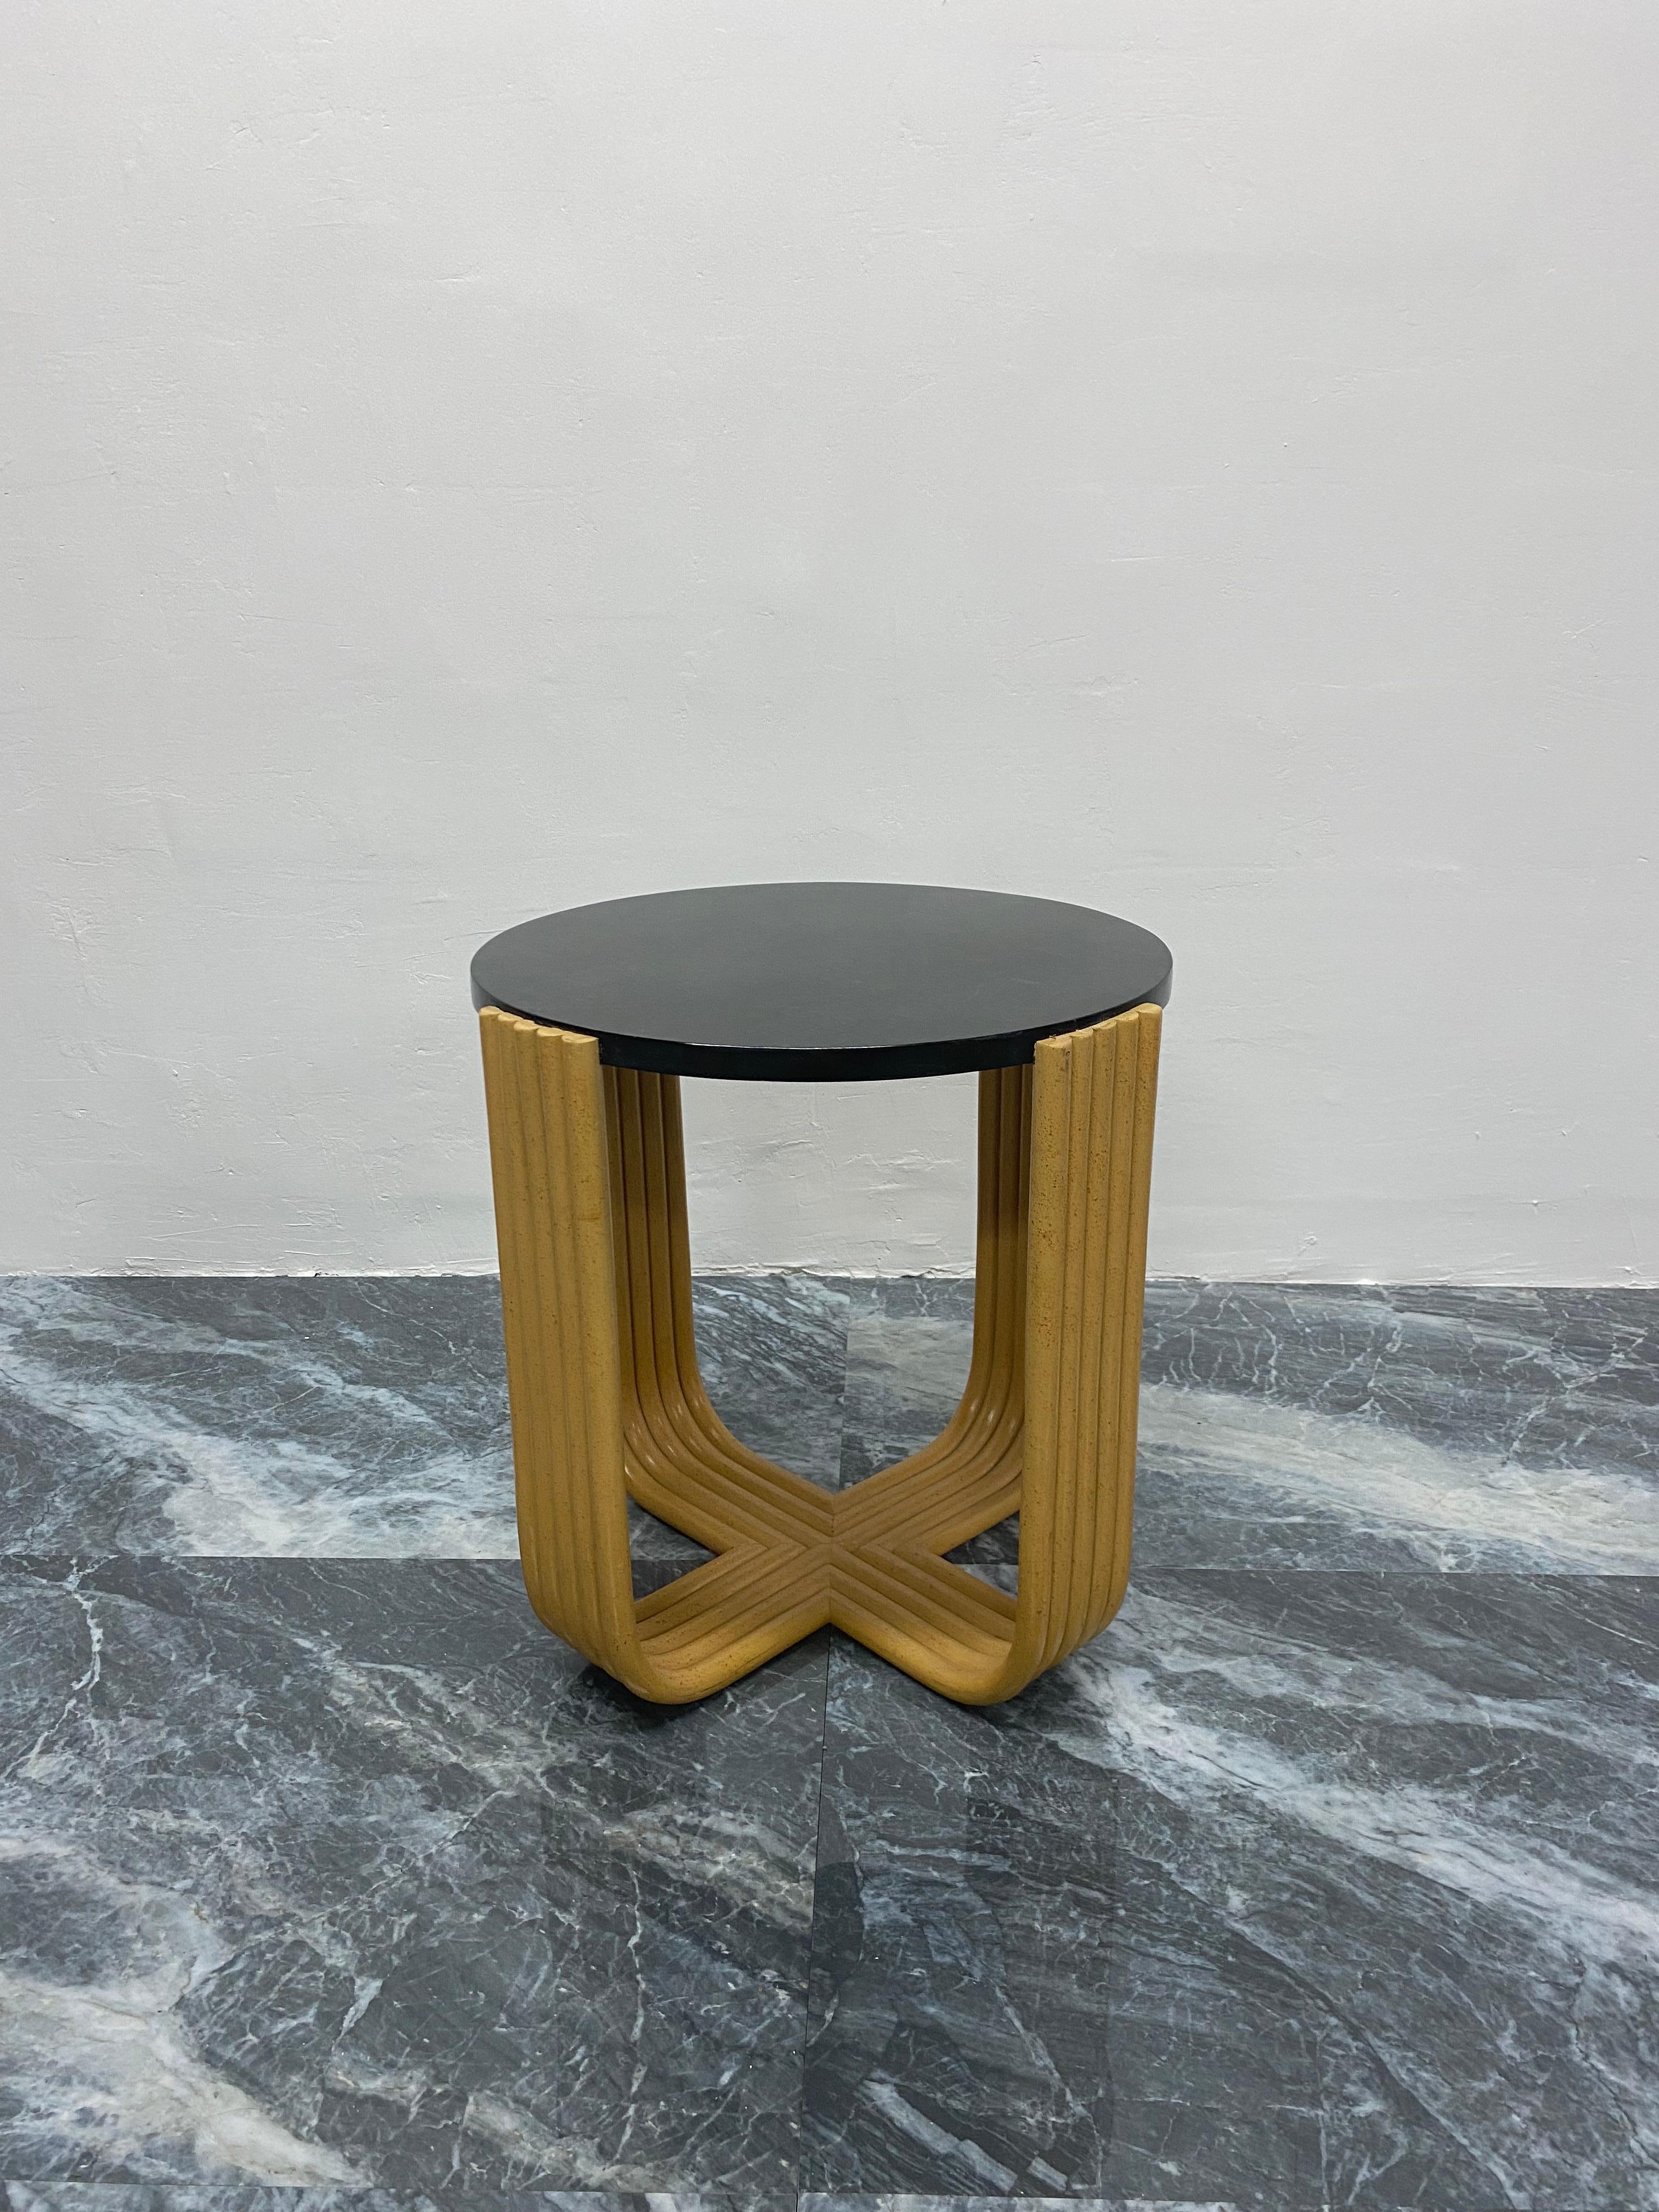 Side or occassional table with black tessellated stone top on a faux bamboo bent wood speckle painted base by Maitland Smith, 1980s.